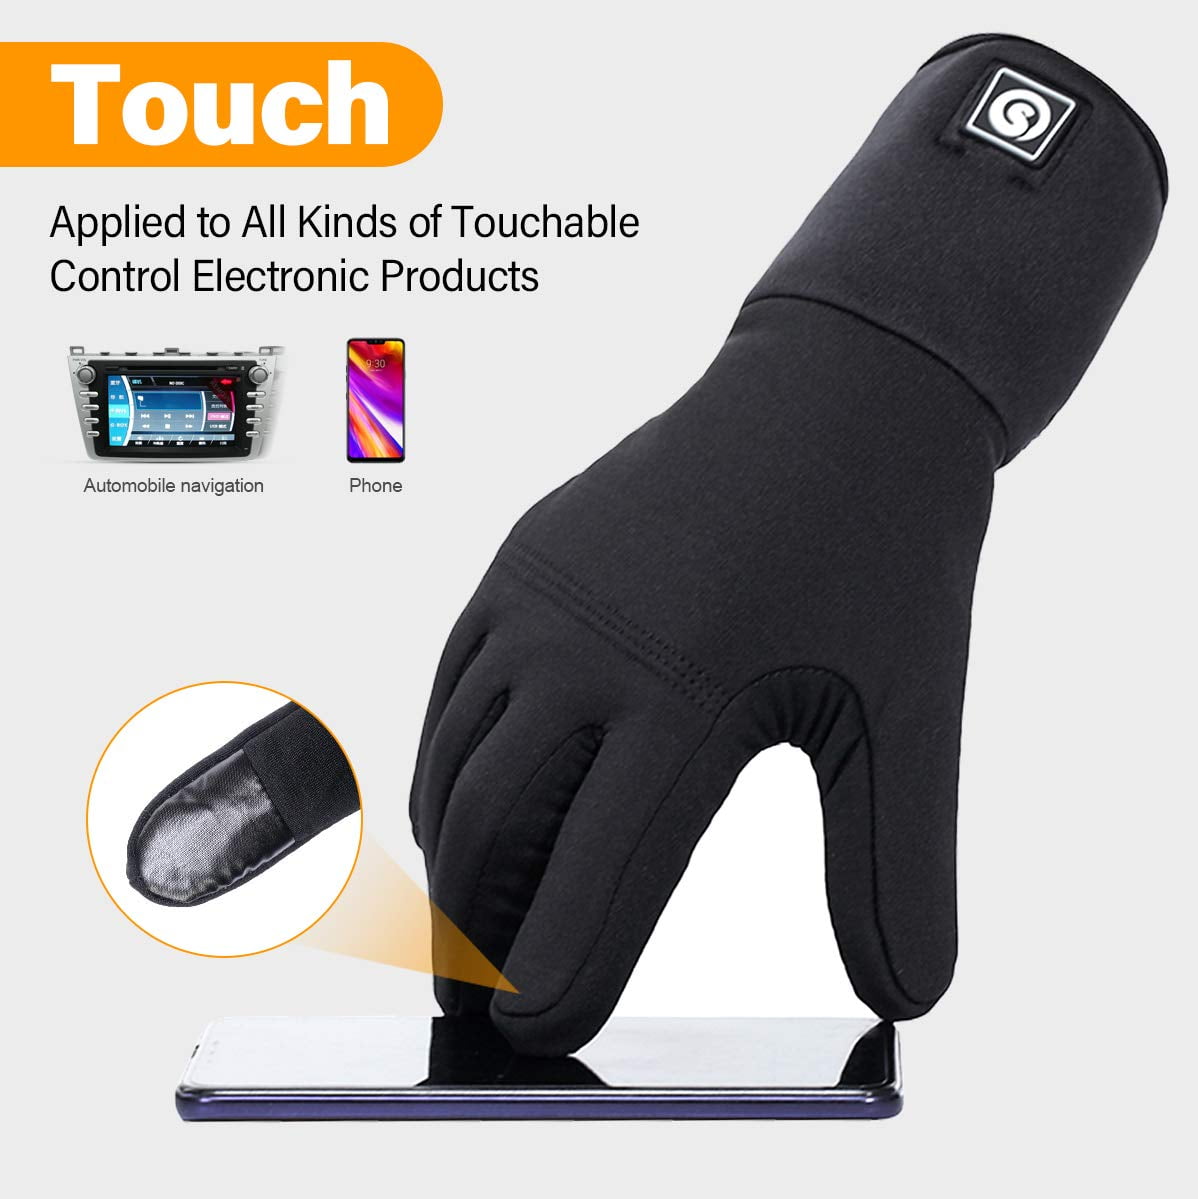 Snow Deer Liners Heated Gloves Mittensfor Men Women Rechargeable Electric  Battery Ski Snowboarding Hiking Cycling Hunting Thin Gloves Hand Warmer 